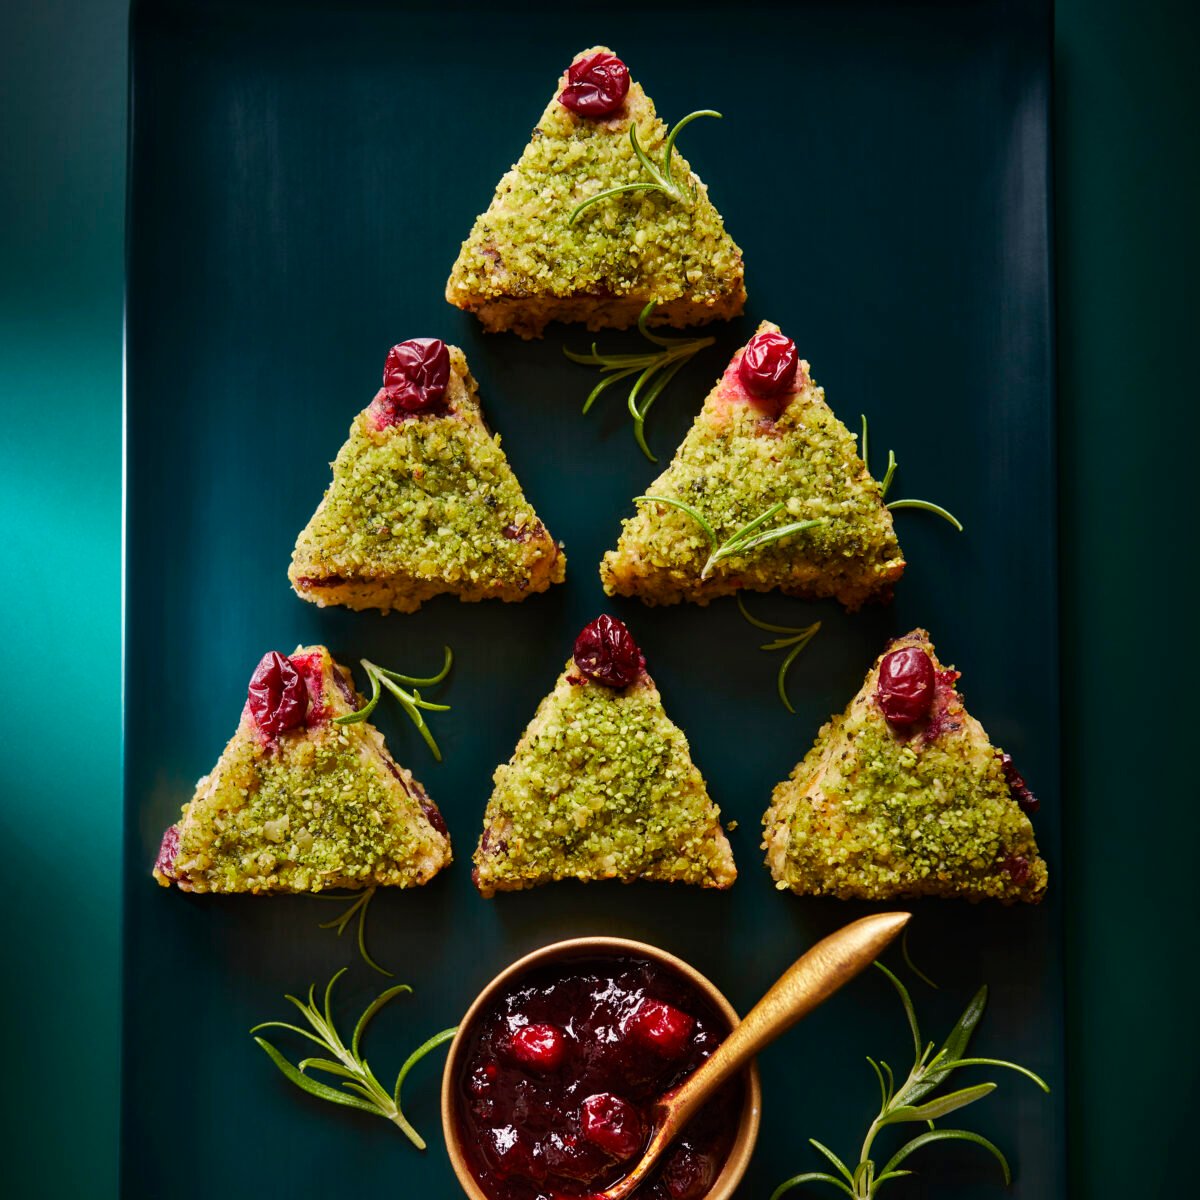 Vegan stuffing Christmas trees from Lidl